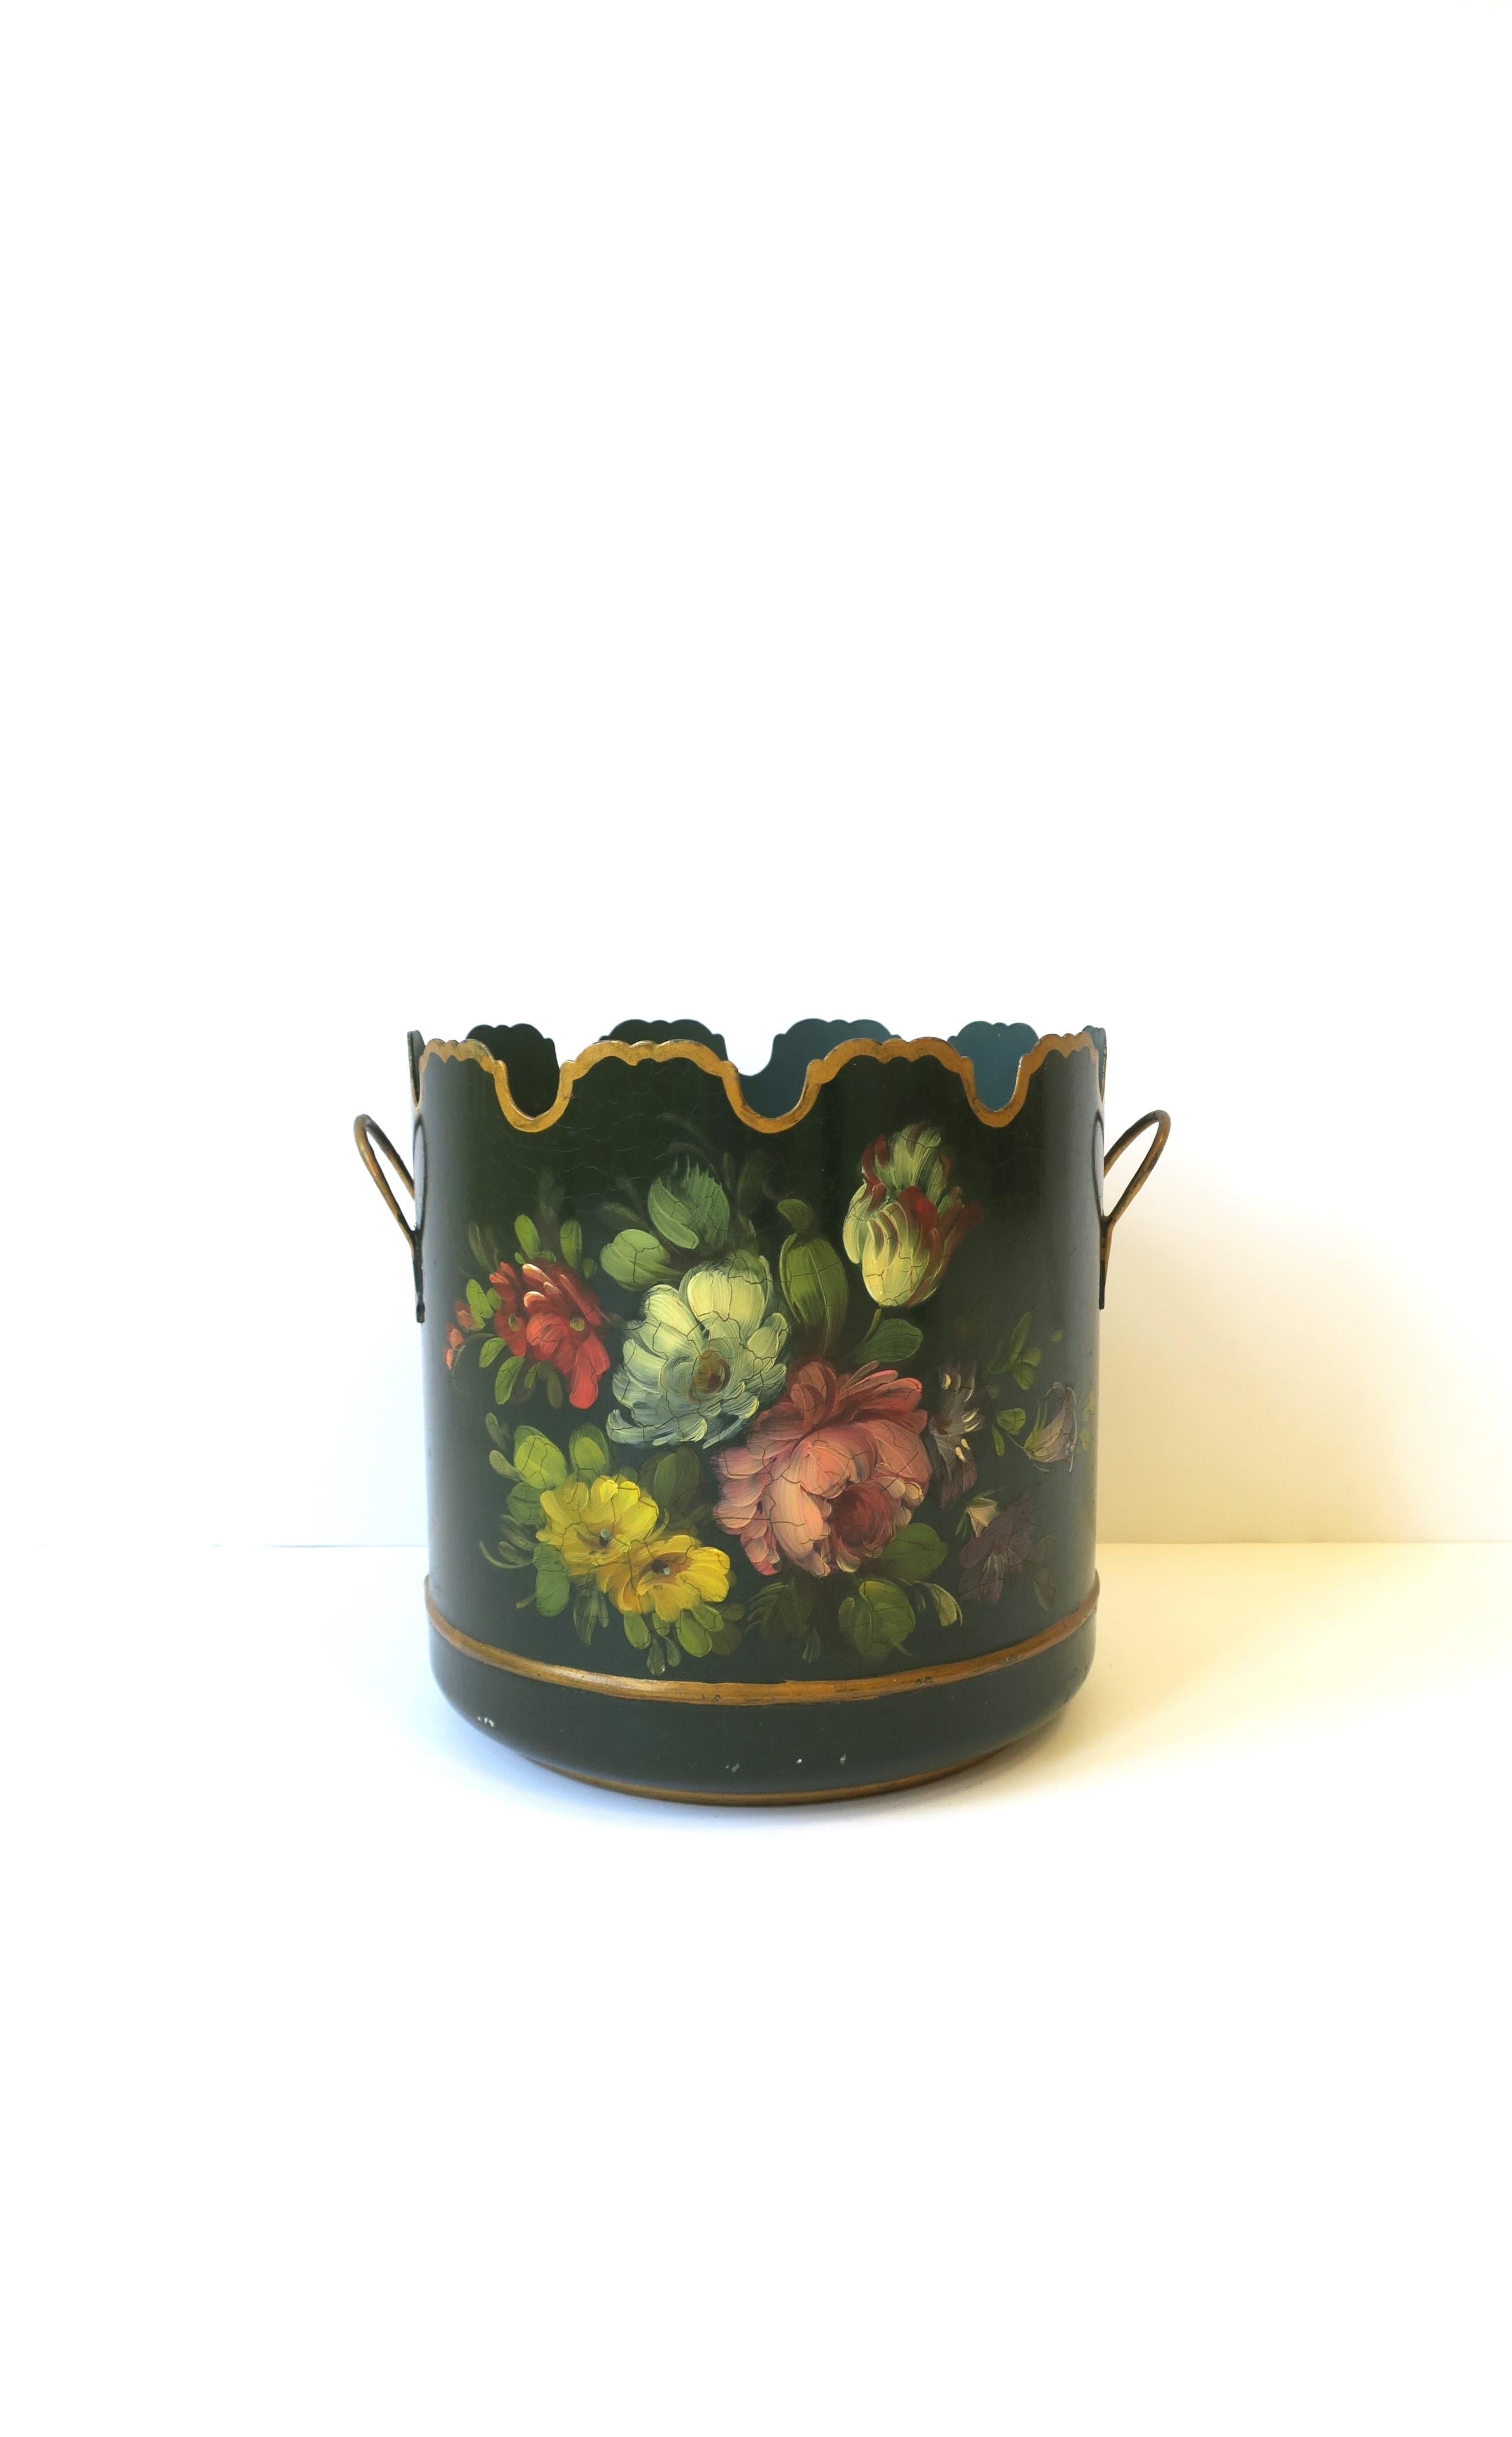 A French Tôle dark green and gold planter jardinière cachepot with hand-painted floral design and scalloped edge, circa early-20th century, France. Piece, dark green, has hand-painted floral design on front, gold scalloped edge around, handles with